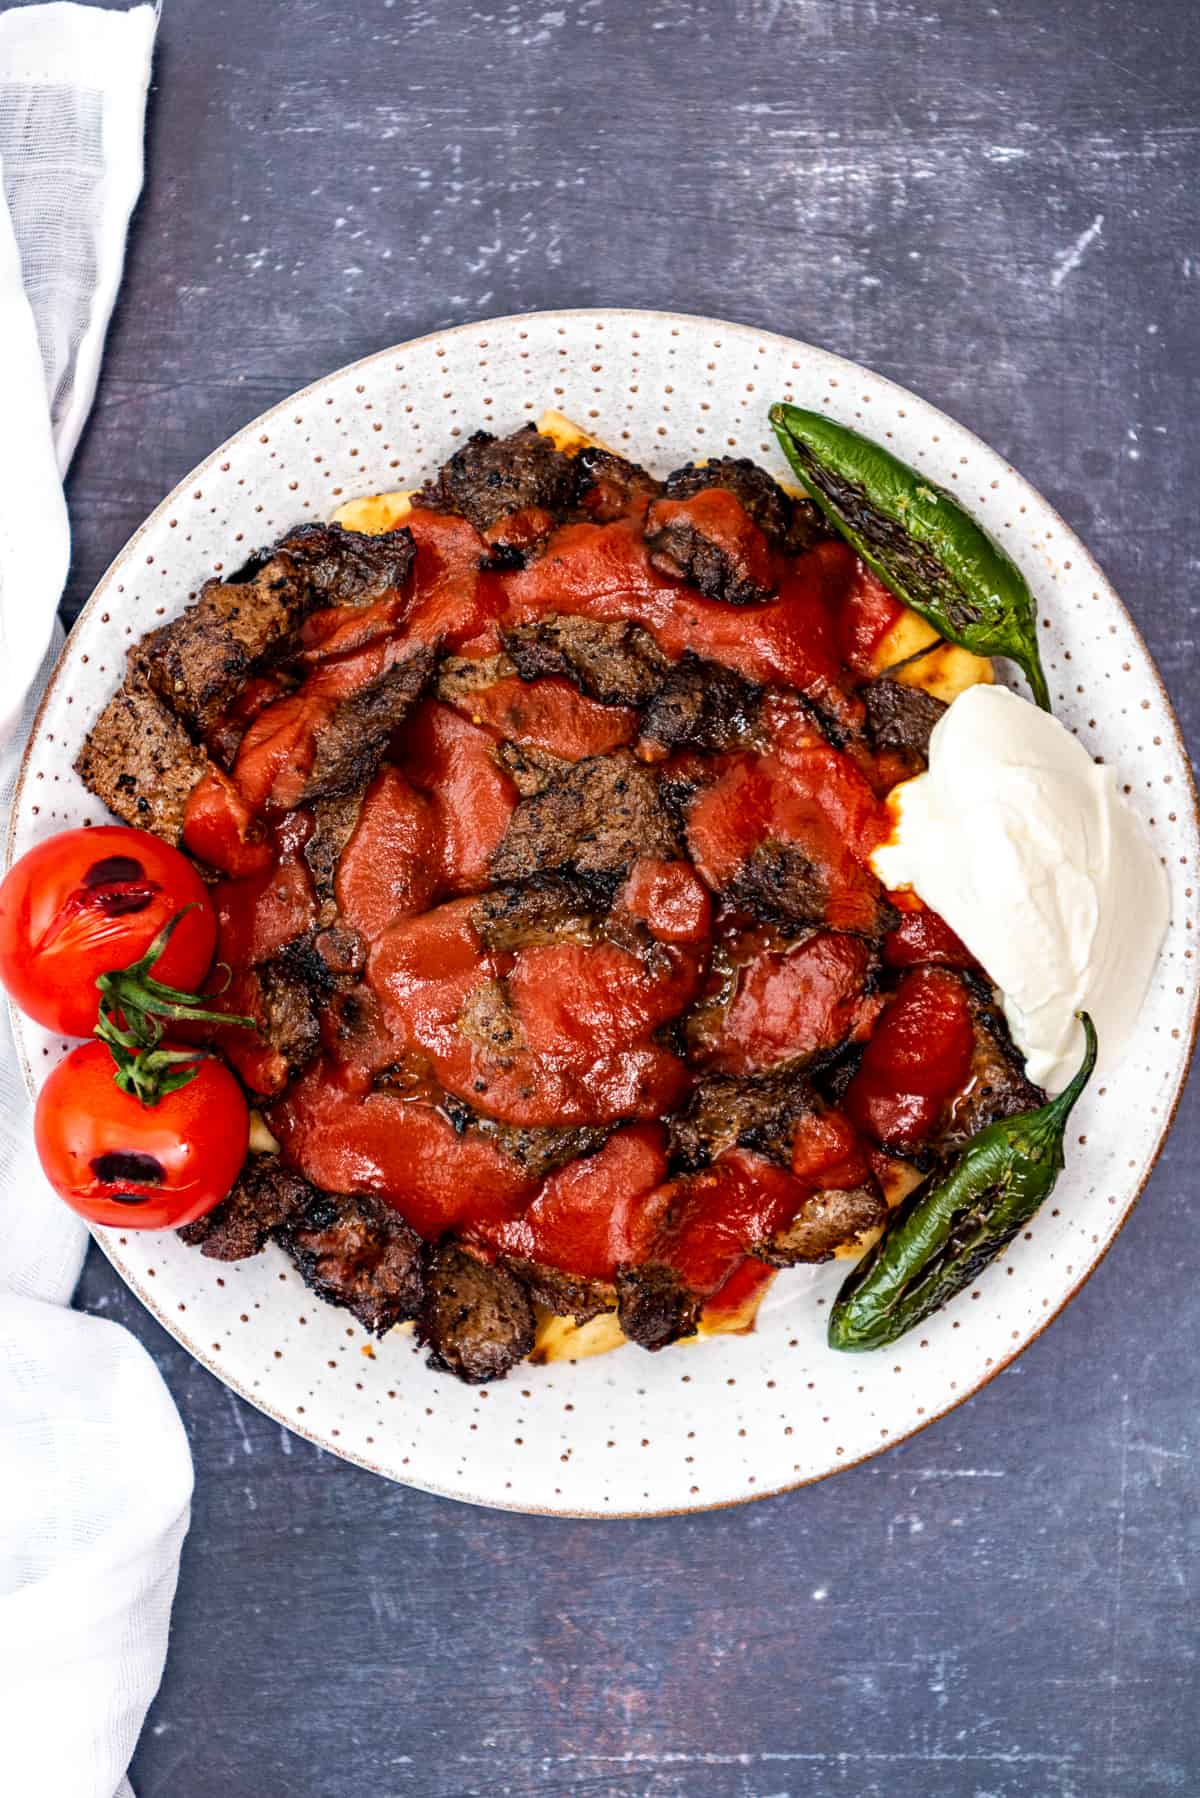 A plate loaded with iskender kebab topped with a tomato sauce and paired with yogurt and green peppers on the side.